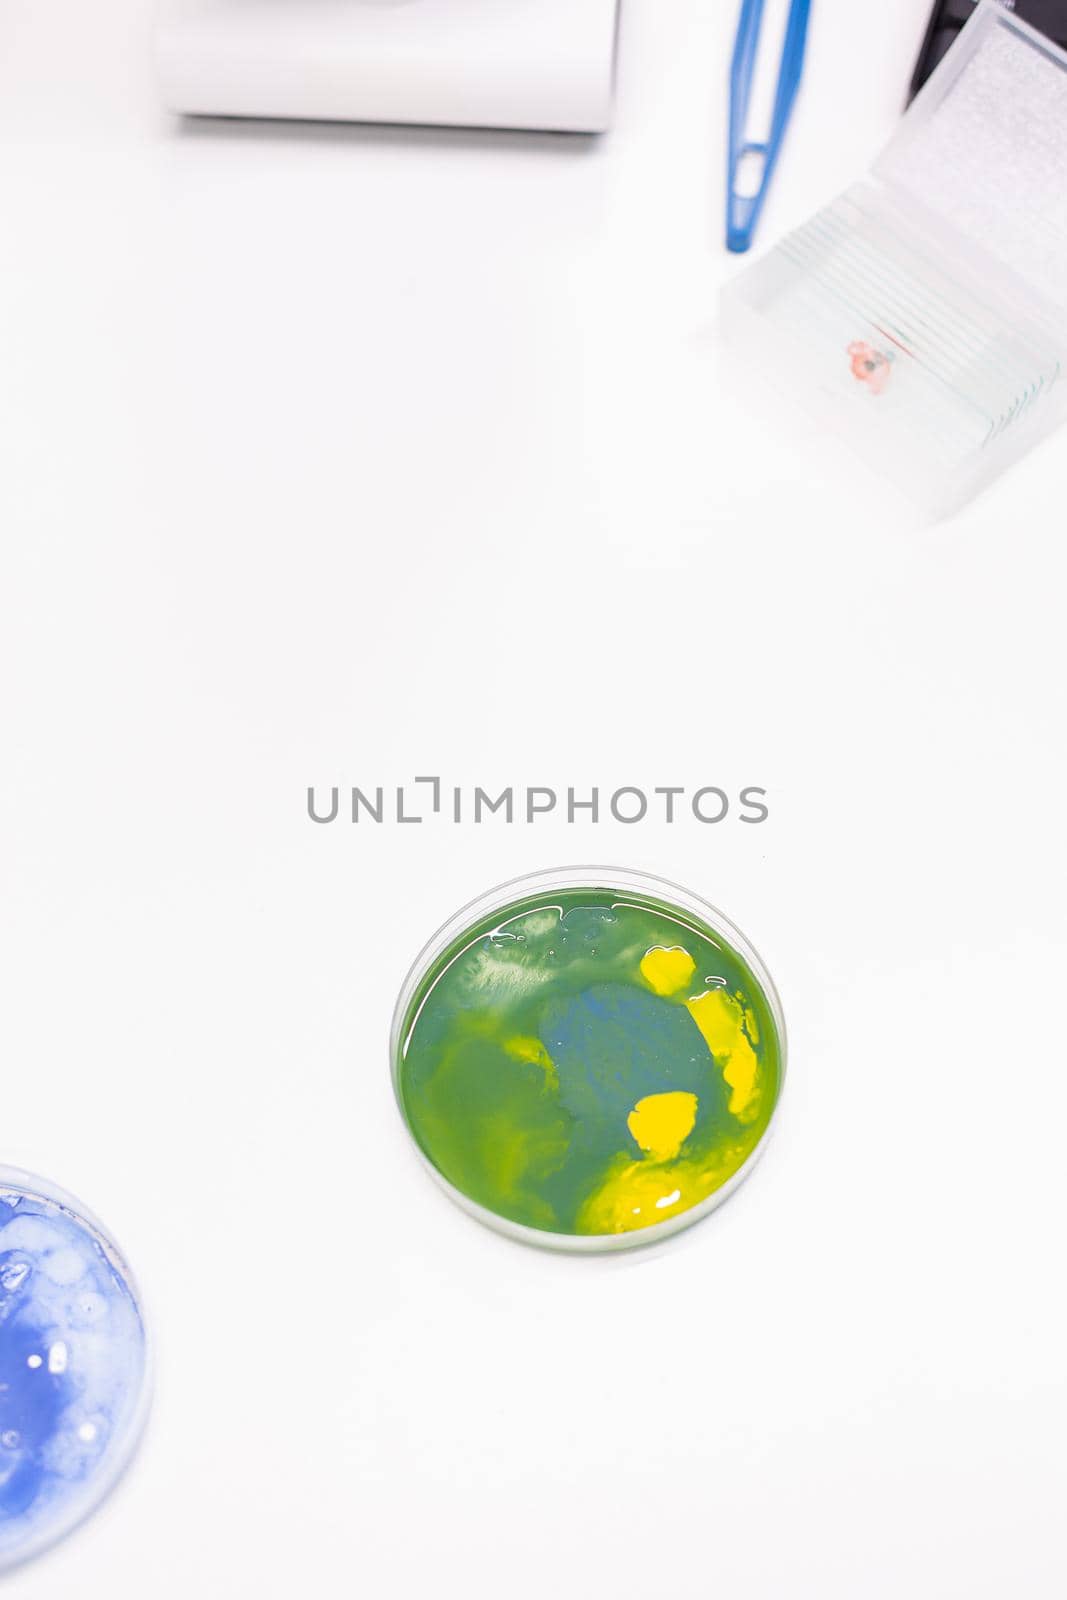 Mixed of bacteria colony in petri dish standing on table in biological scientific hospital laboratory by DCStudio